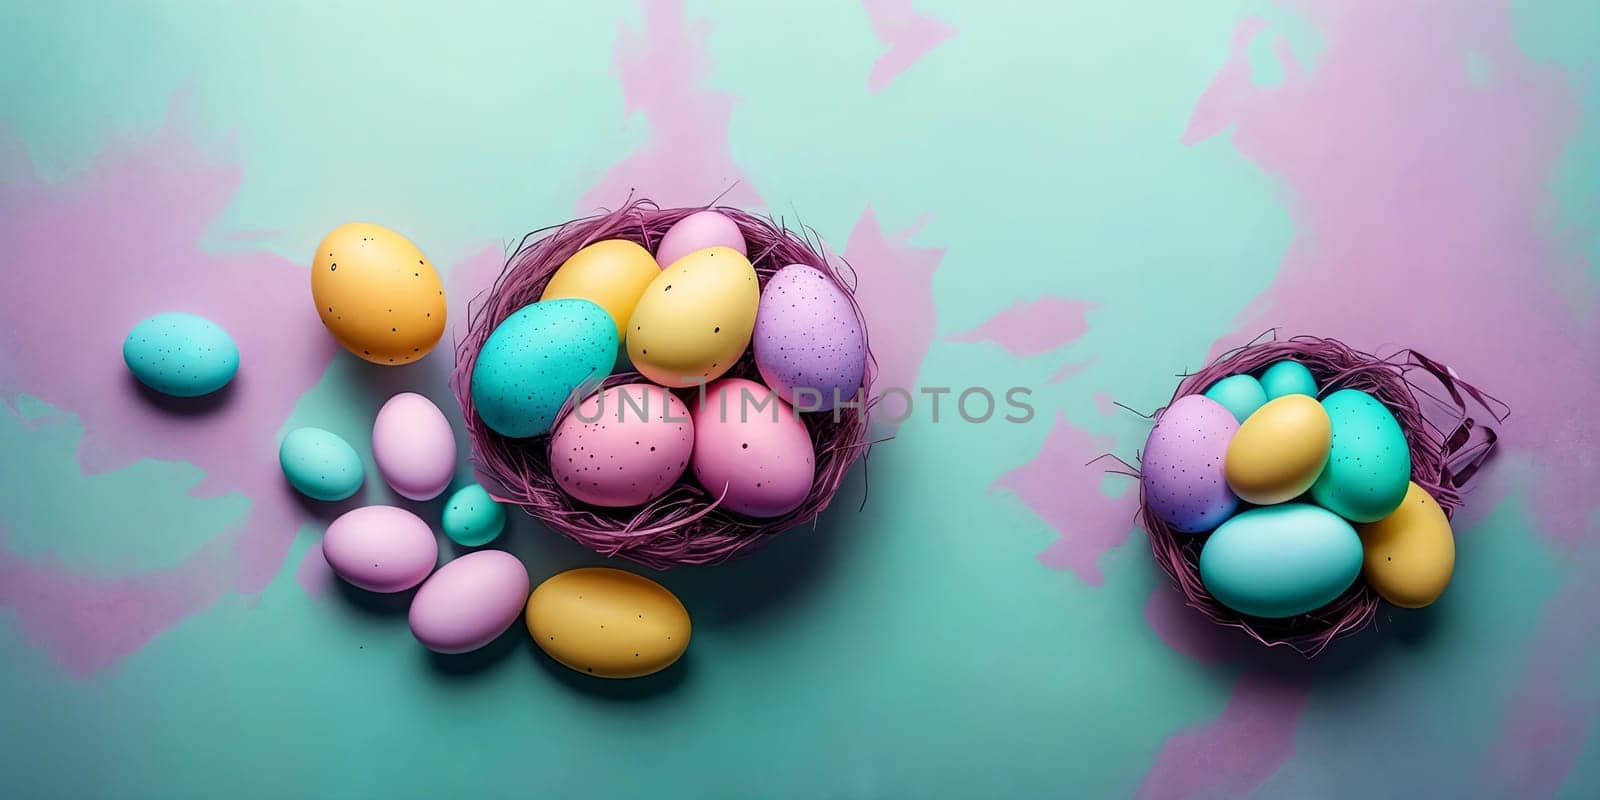 An intricate Easter card design featuring a variety of beautifully decorated eggs. Easter desing